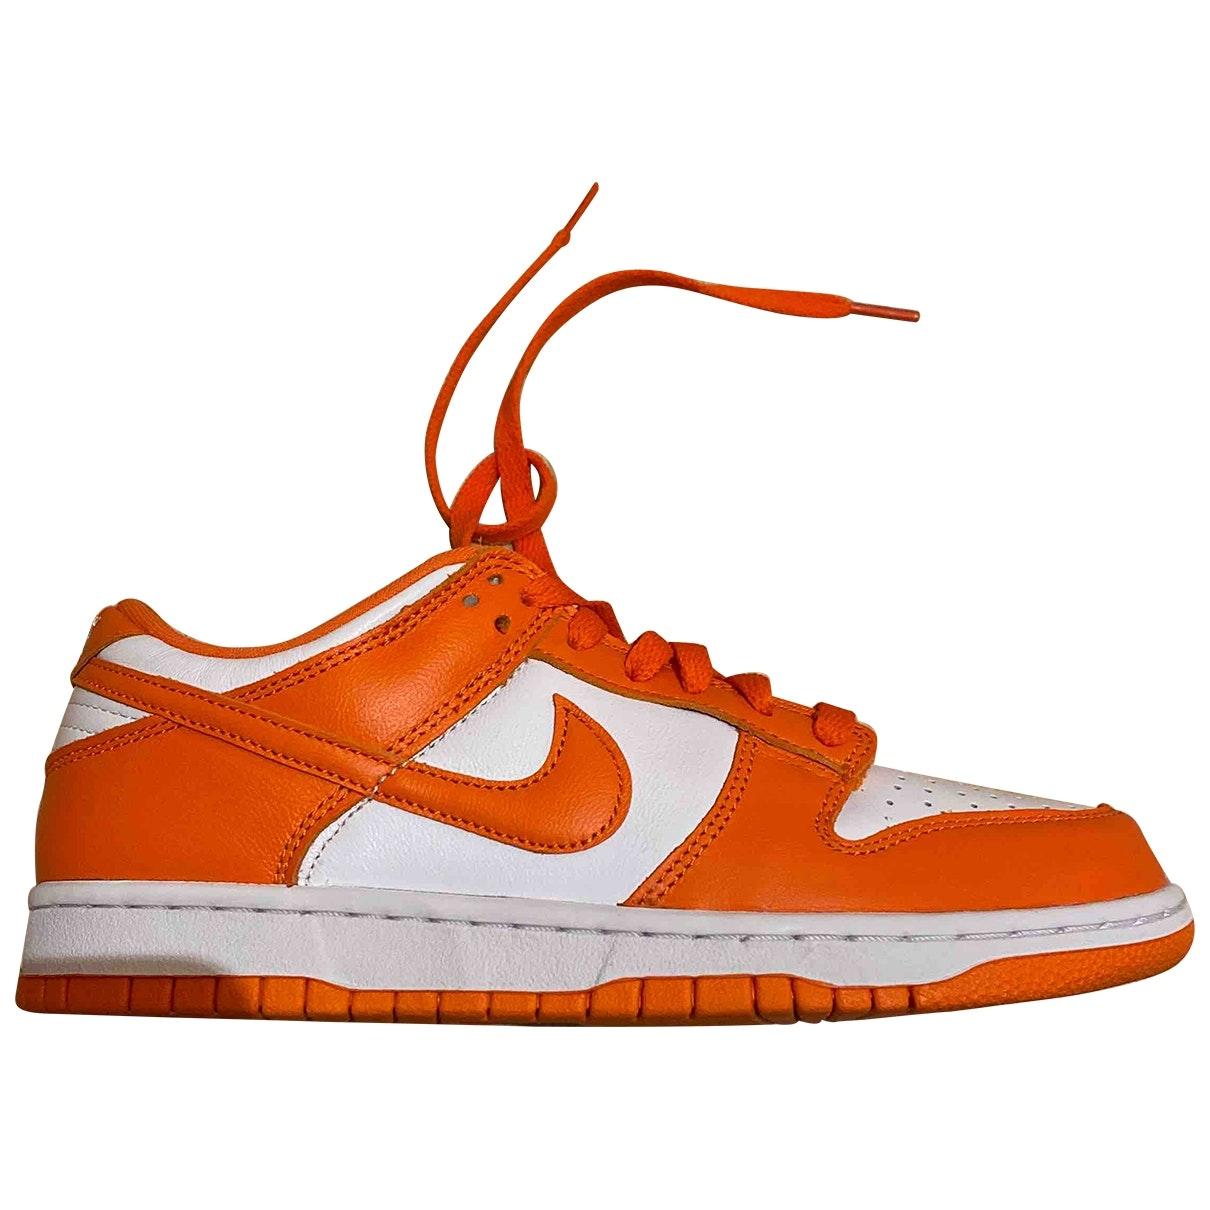 Nike Sb Dunk Leather Low Trainers in Orange for Men - Lyst